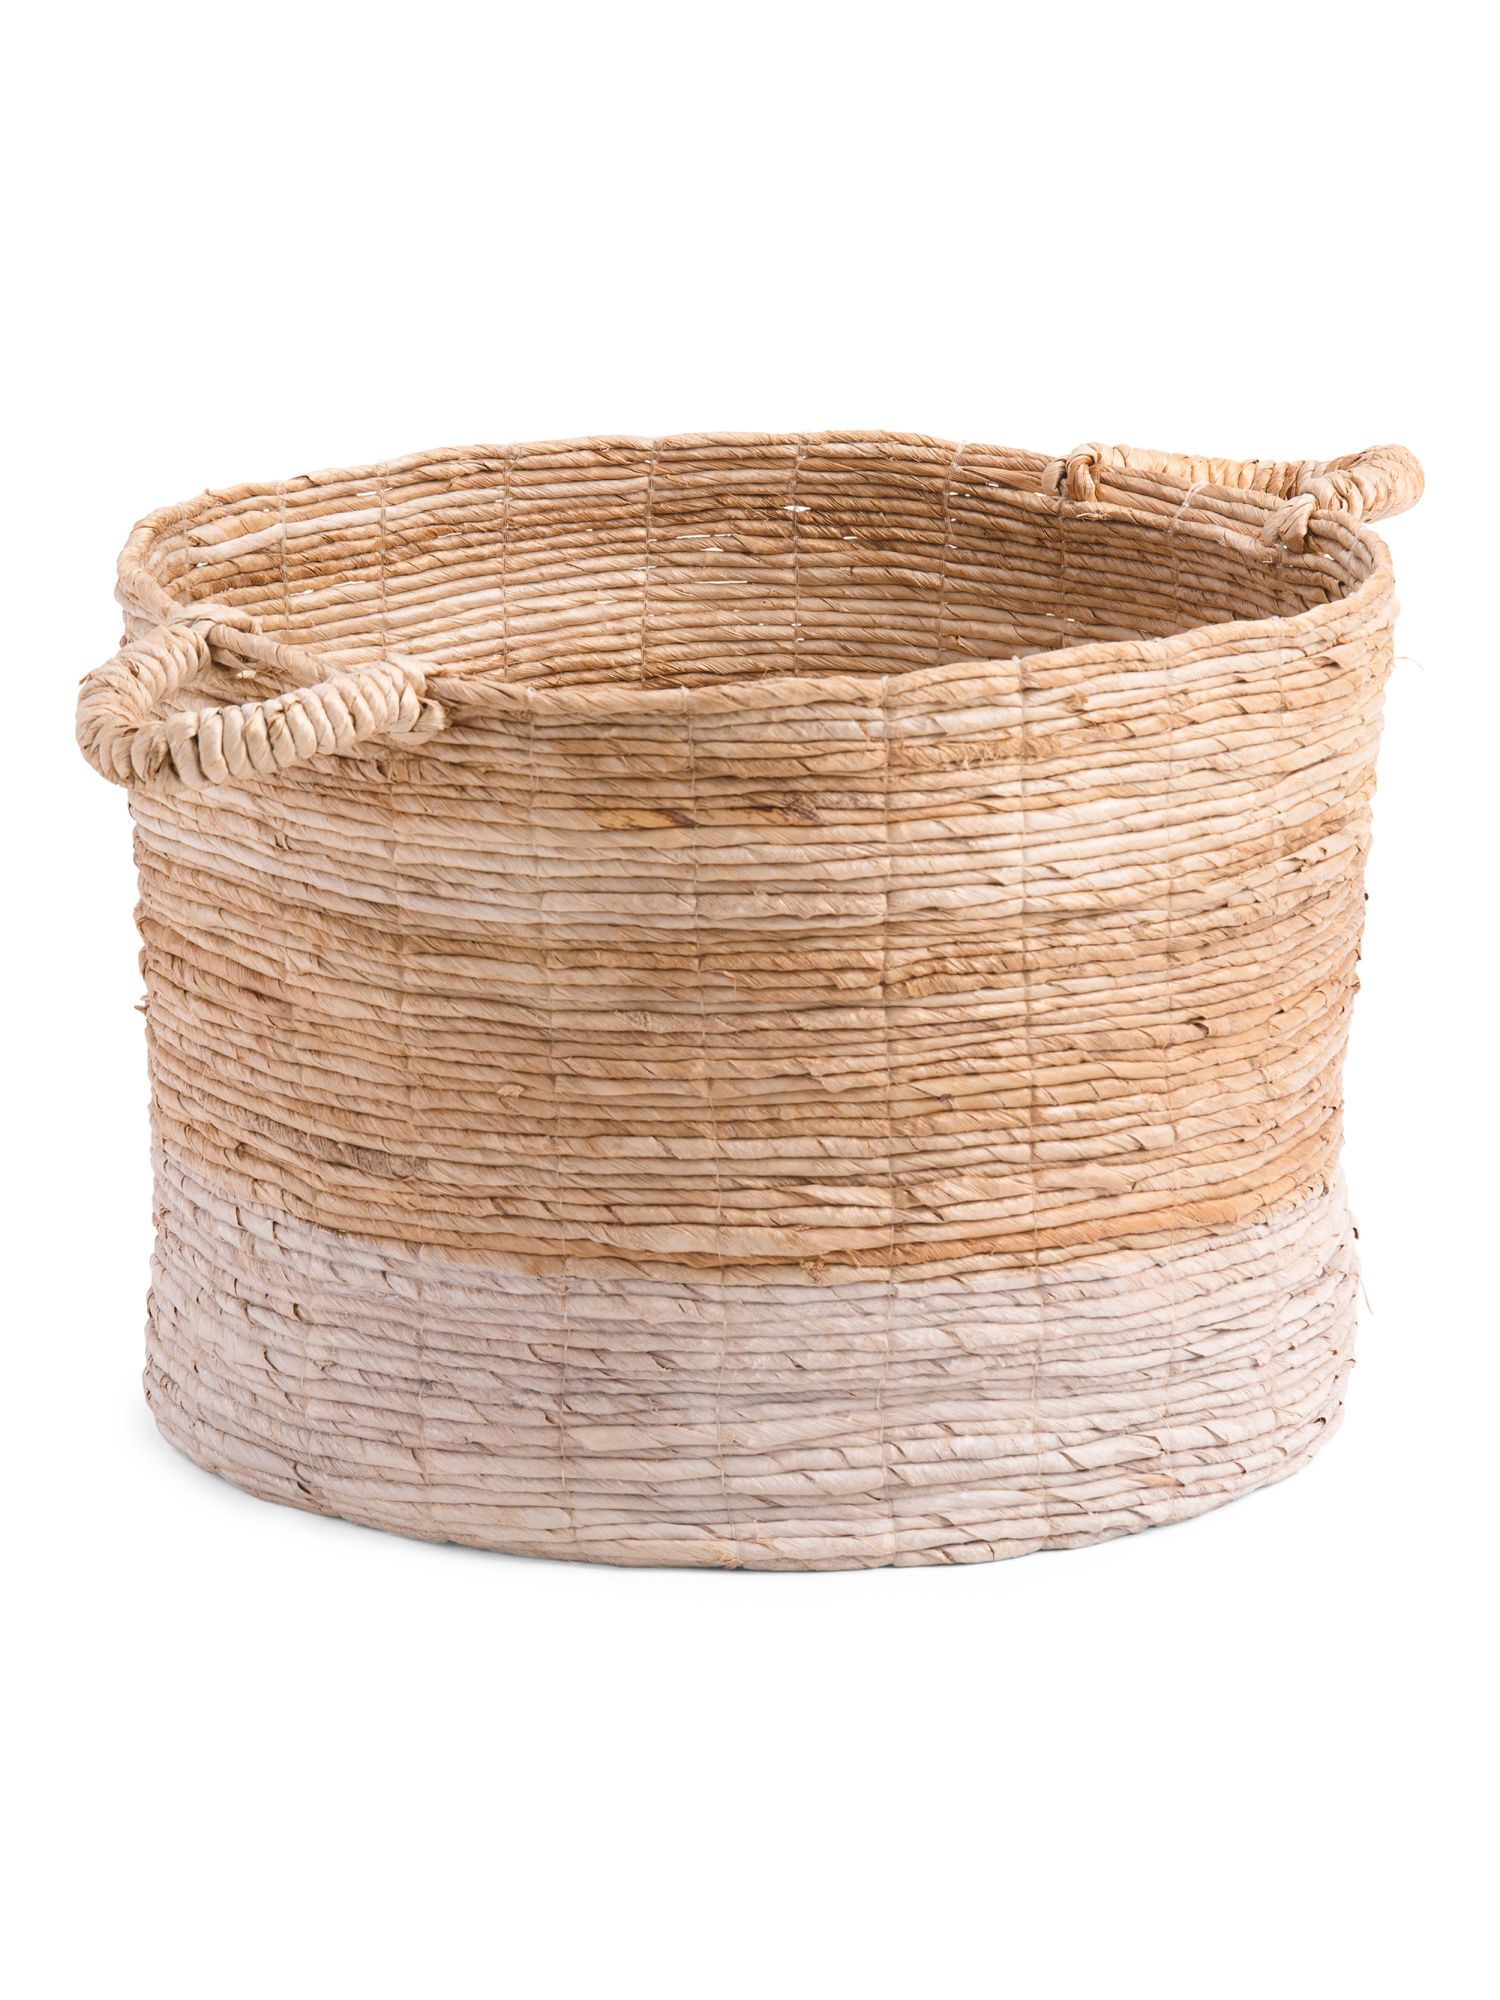 Made In Indonesia Large Basket With Thick Handle | TJ Maxx